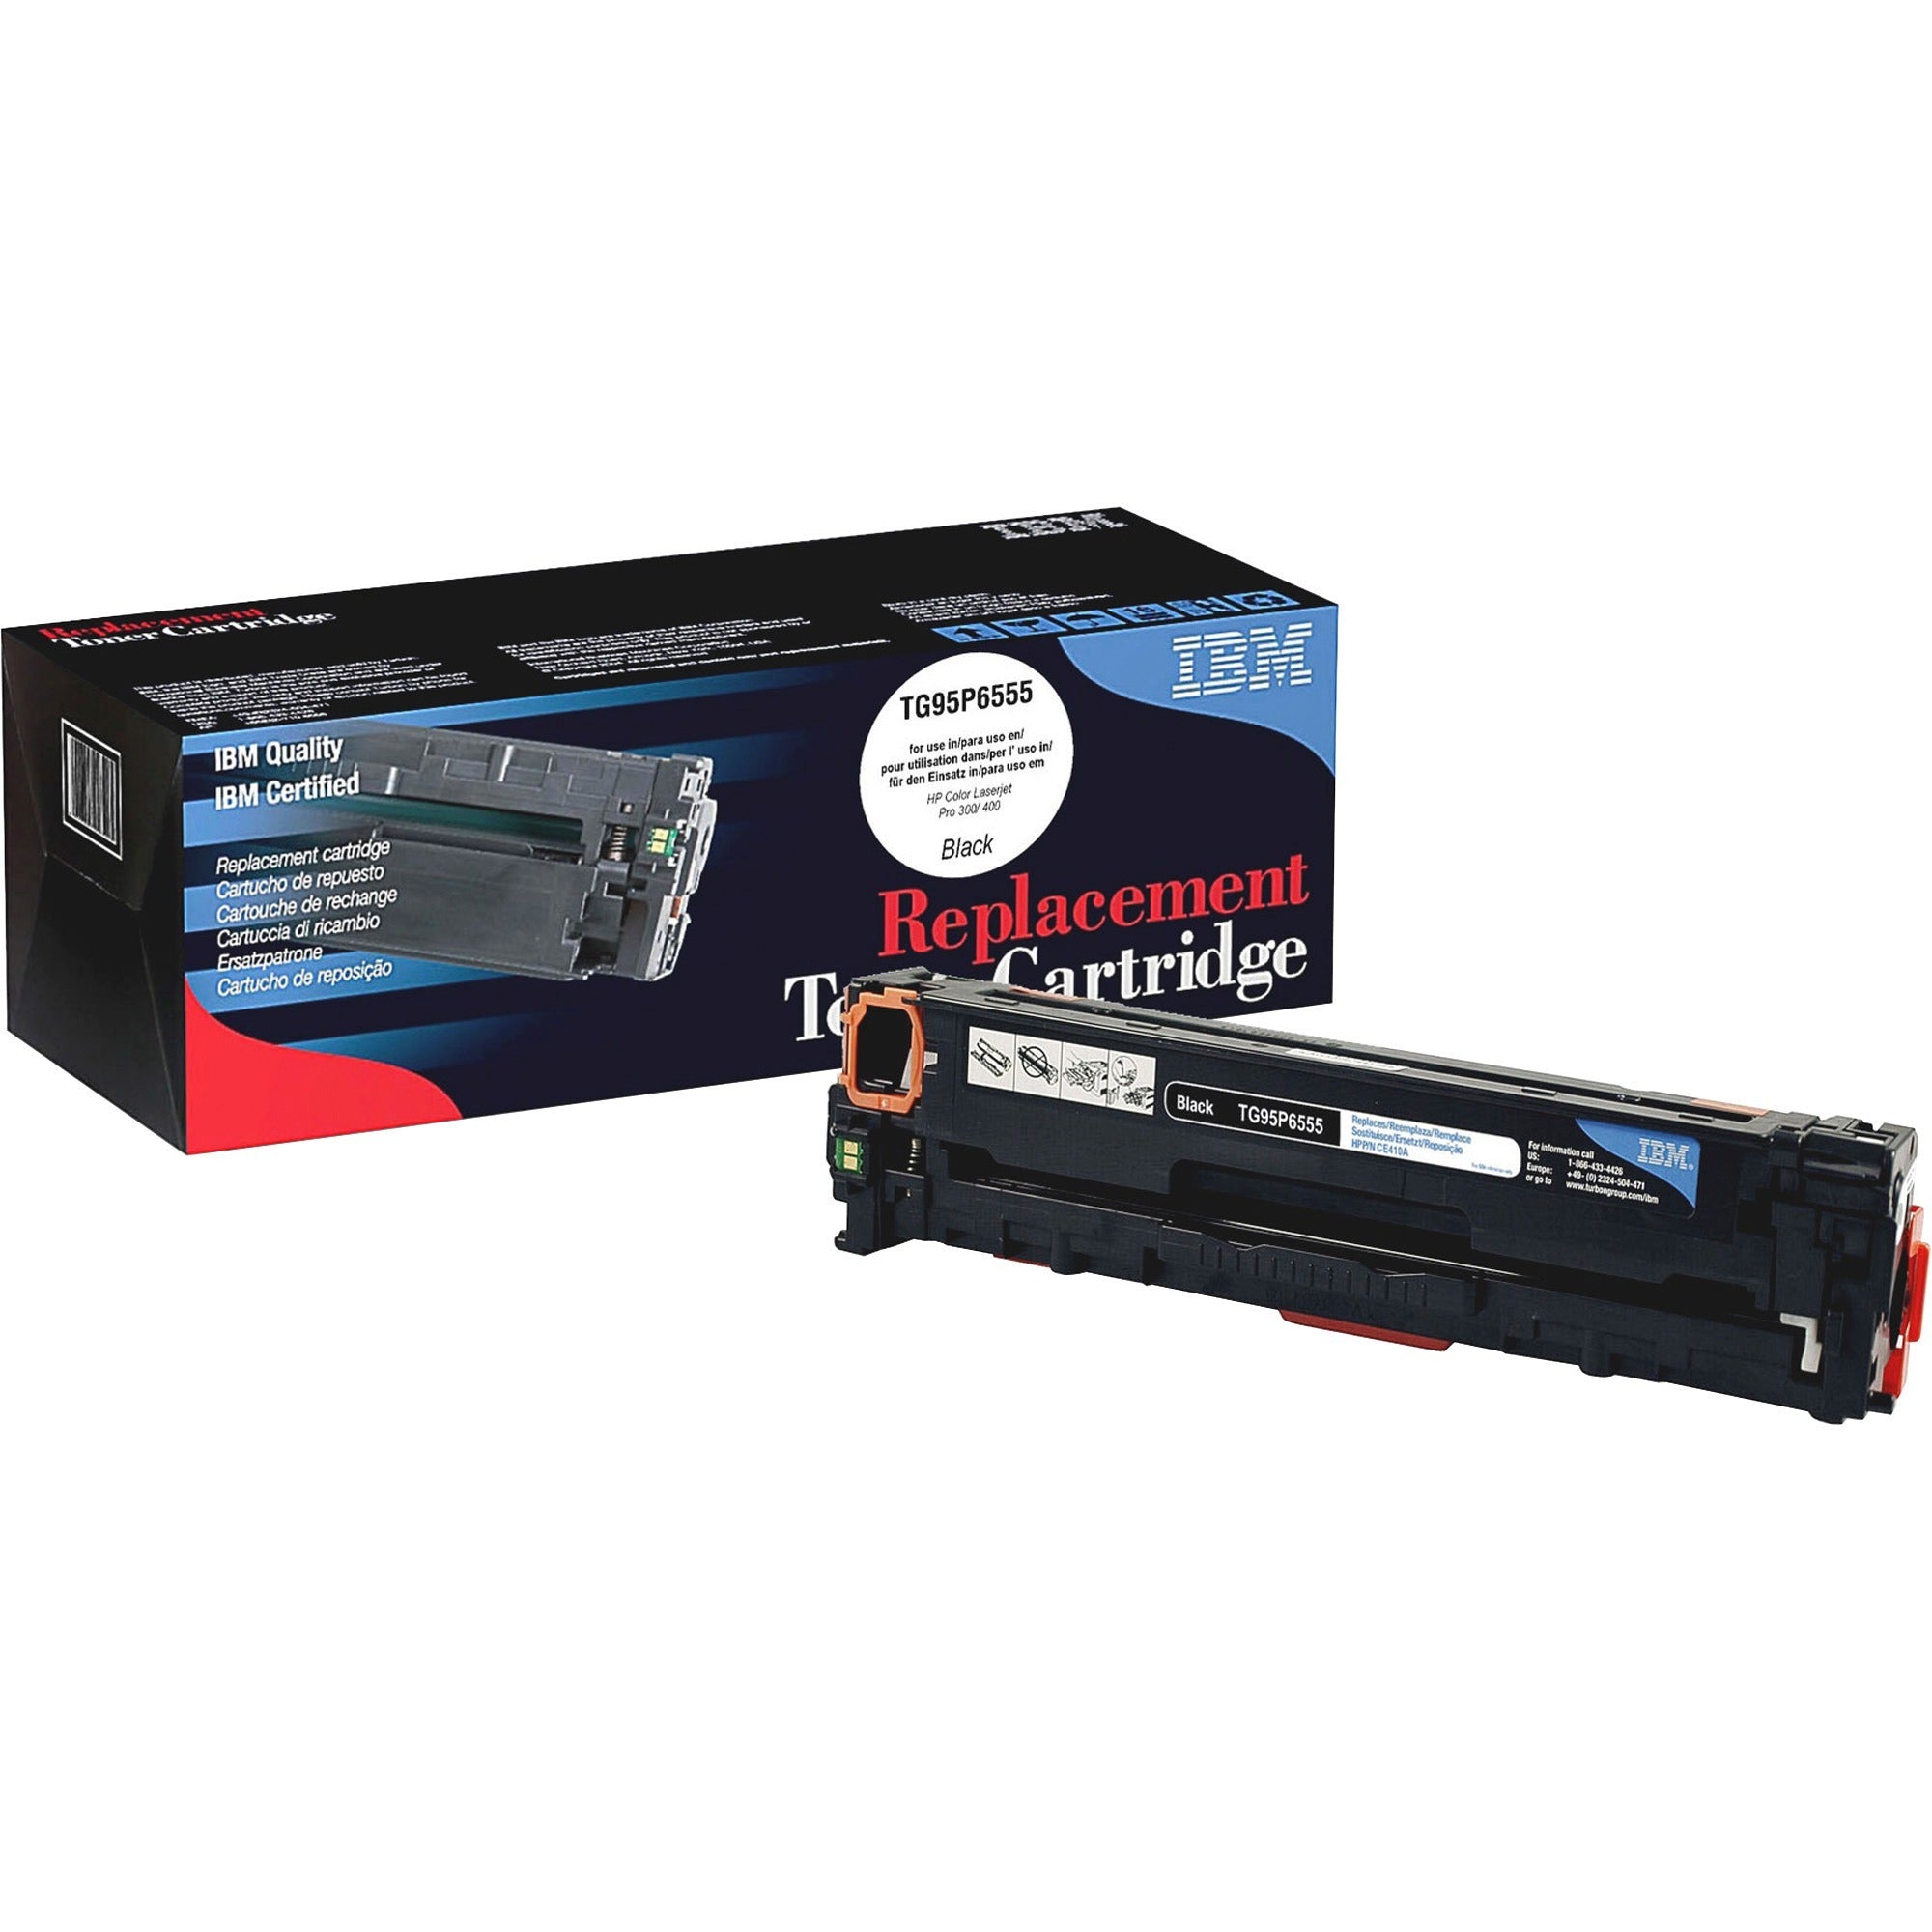 IBM Remanufactured Laser Toner Cartridge - Alternative for HP 305A (CE410A) - Black - 1 Each - 2200 Pages - 